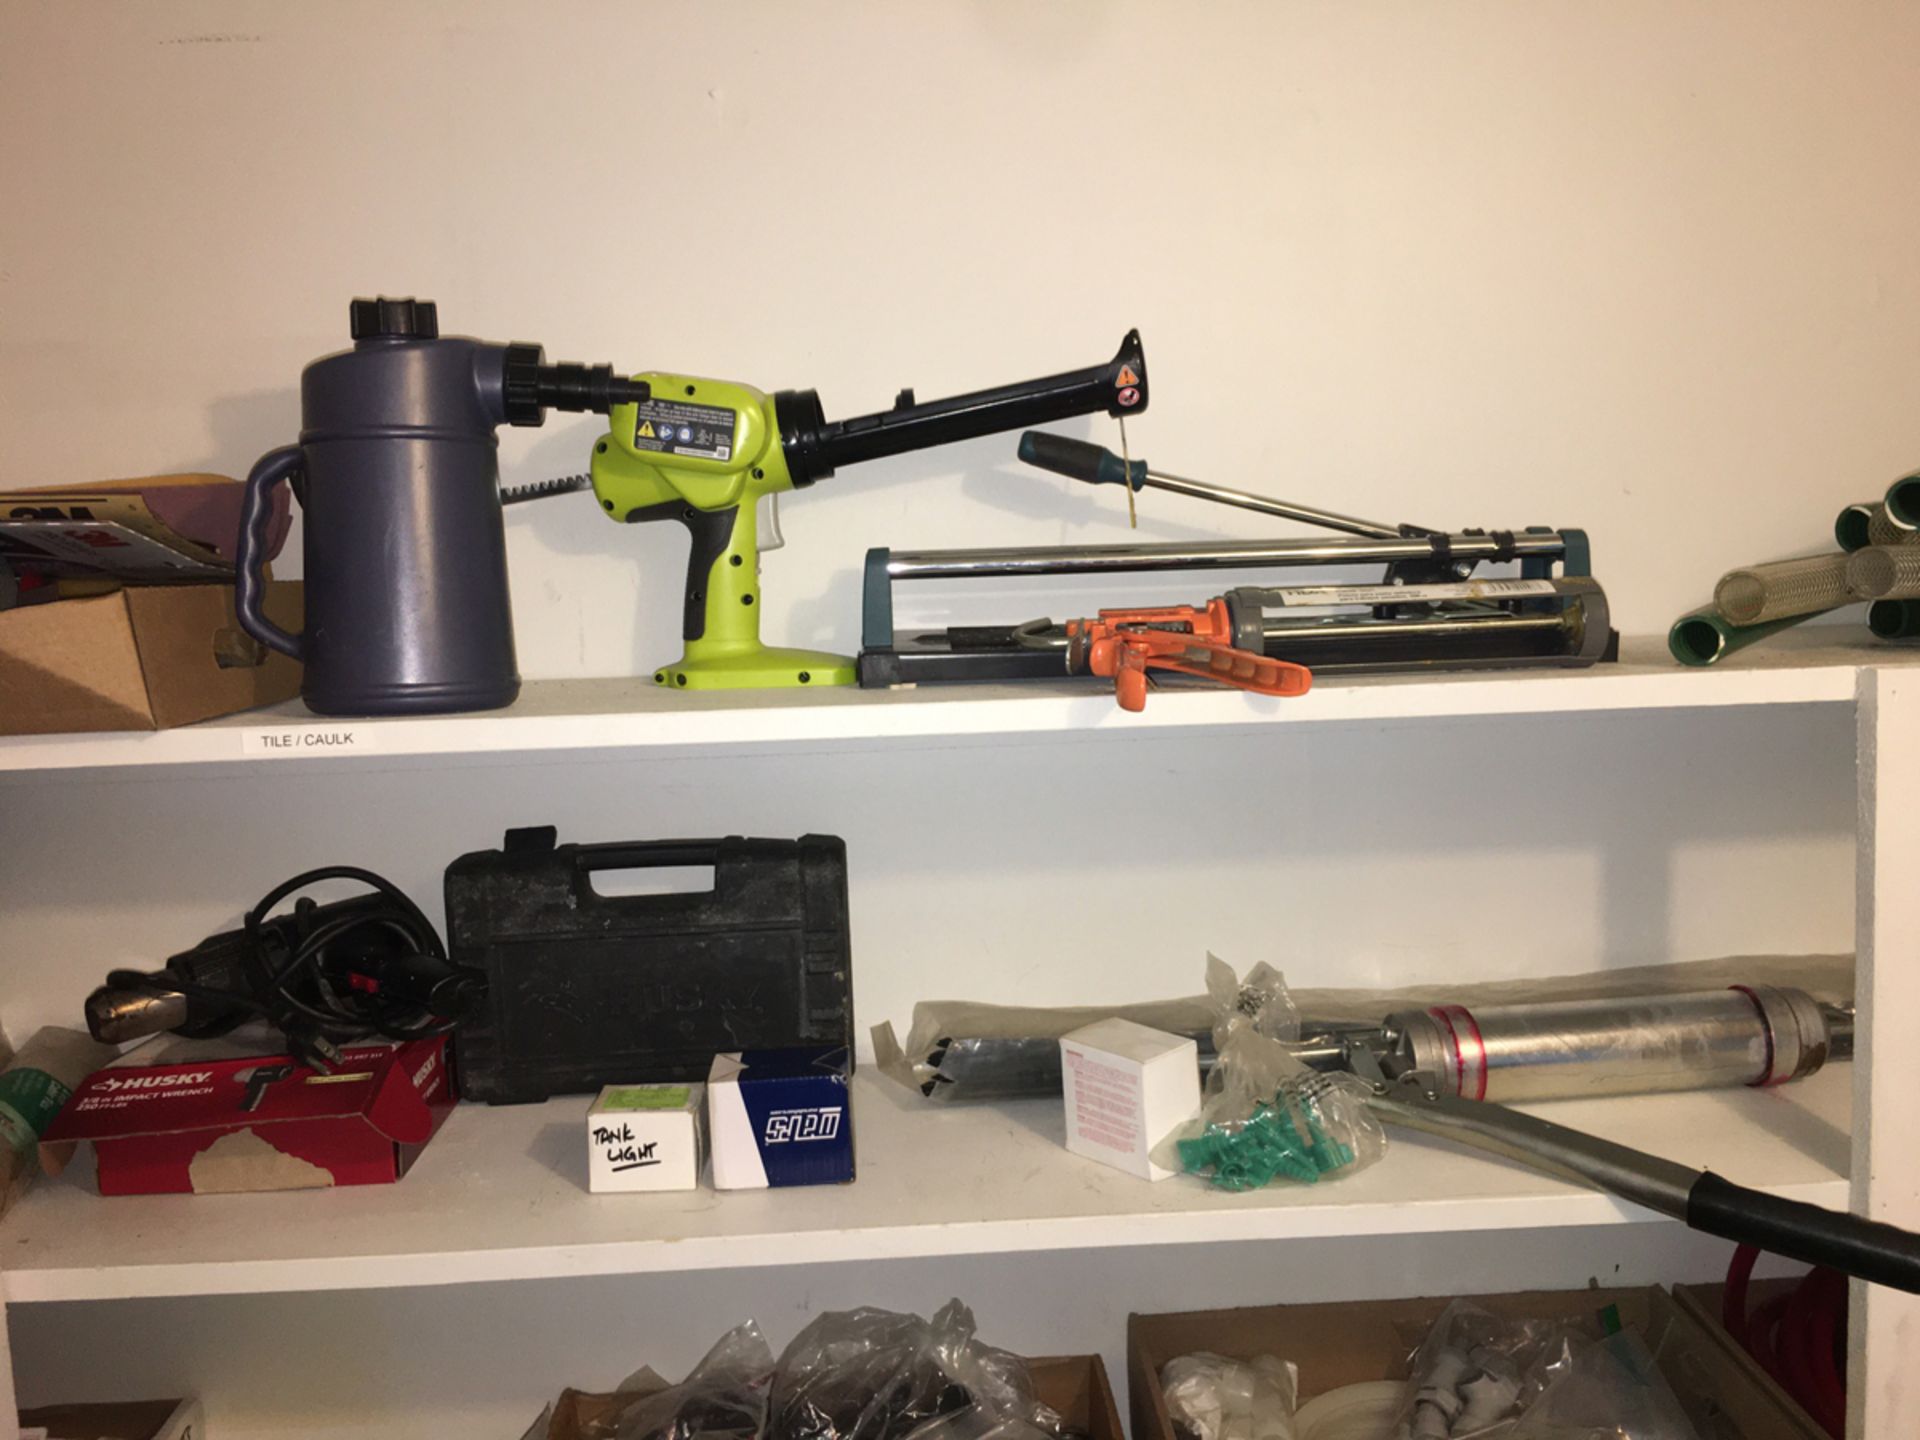 Contents Of Parts And Spares Room - Image 10 of 16